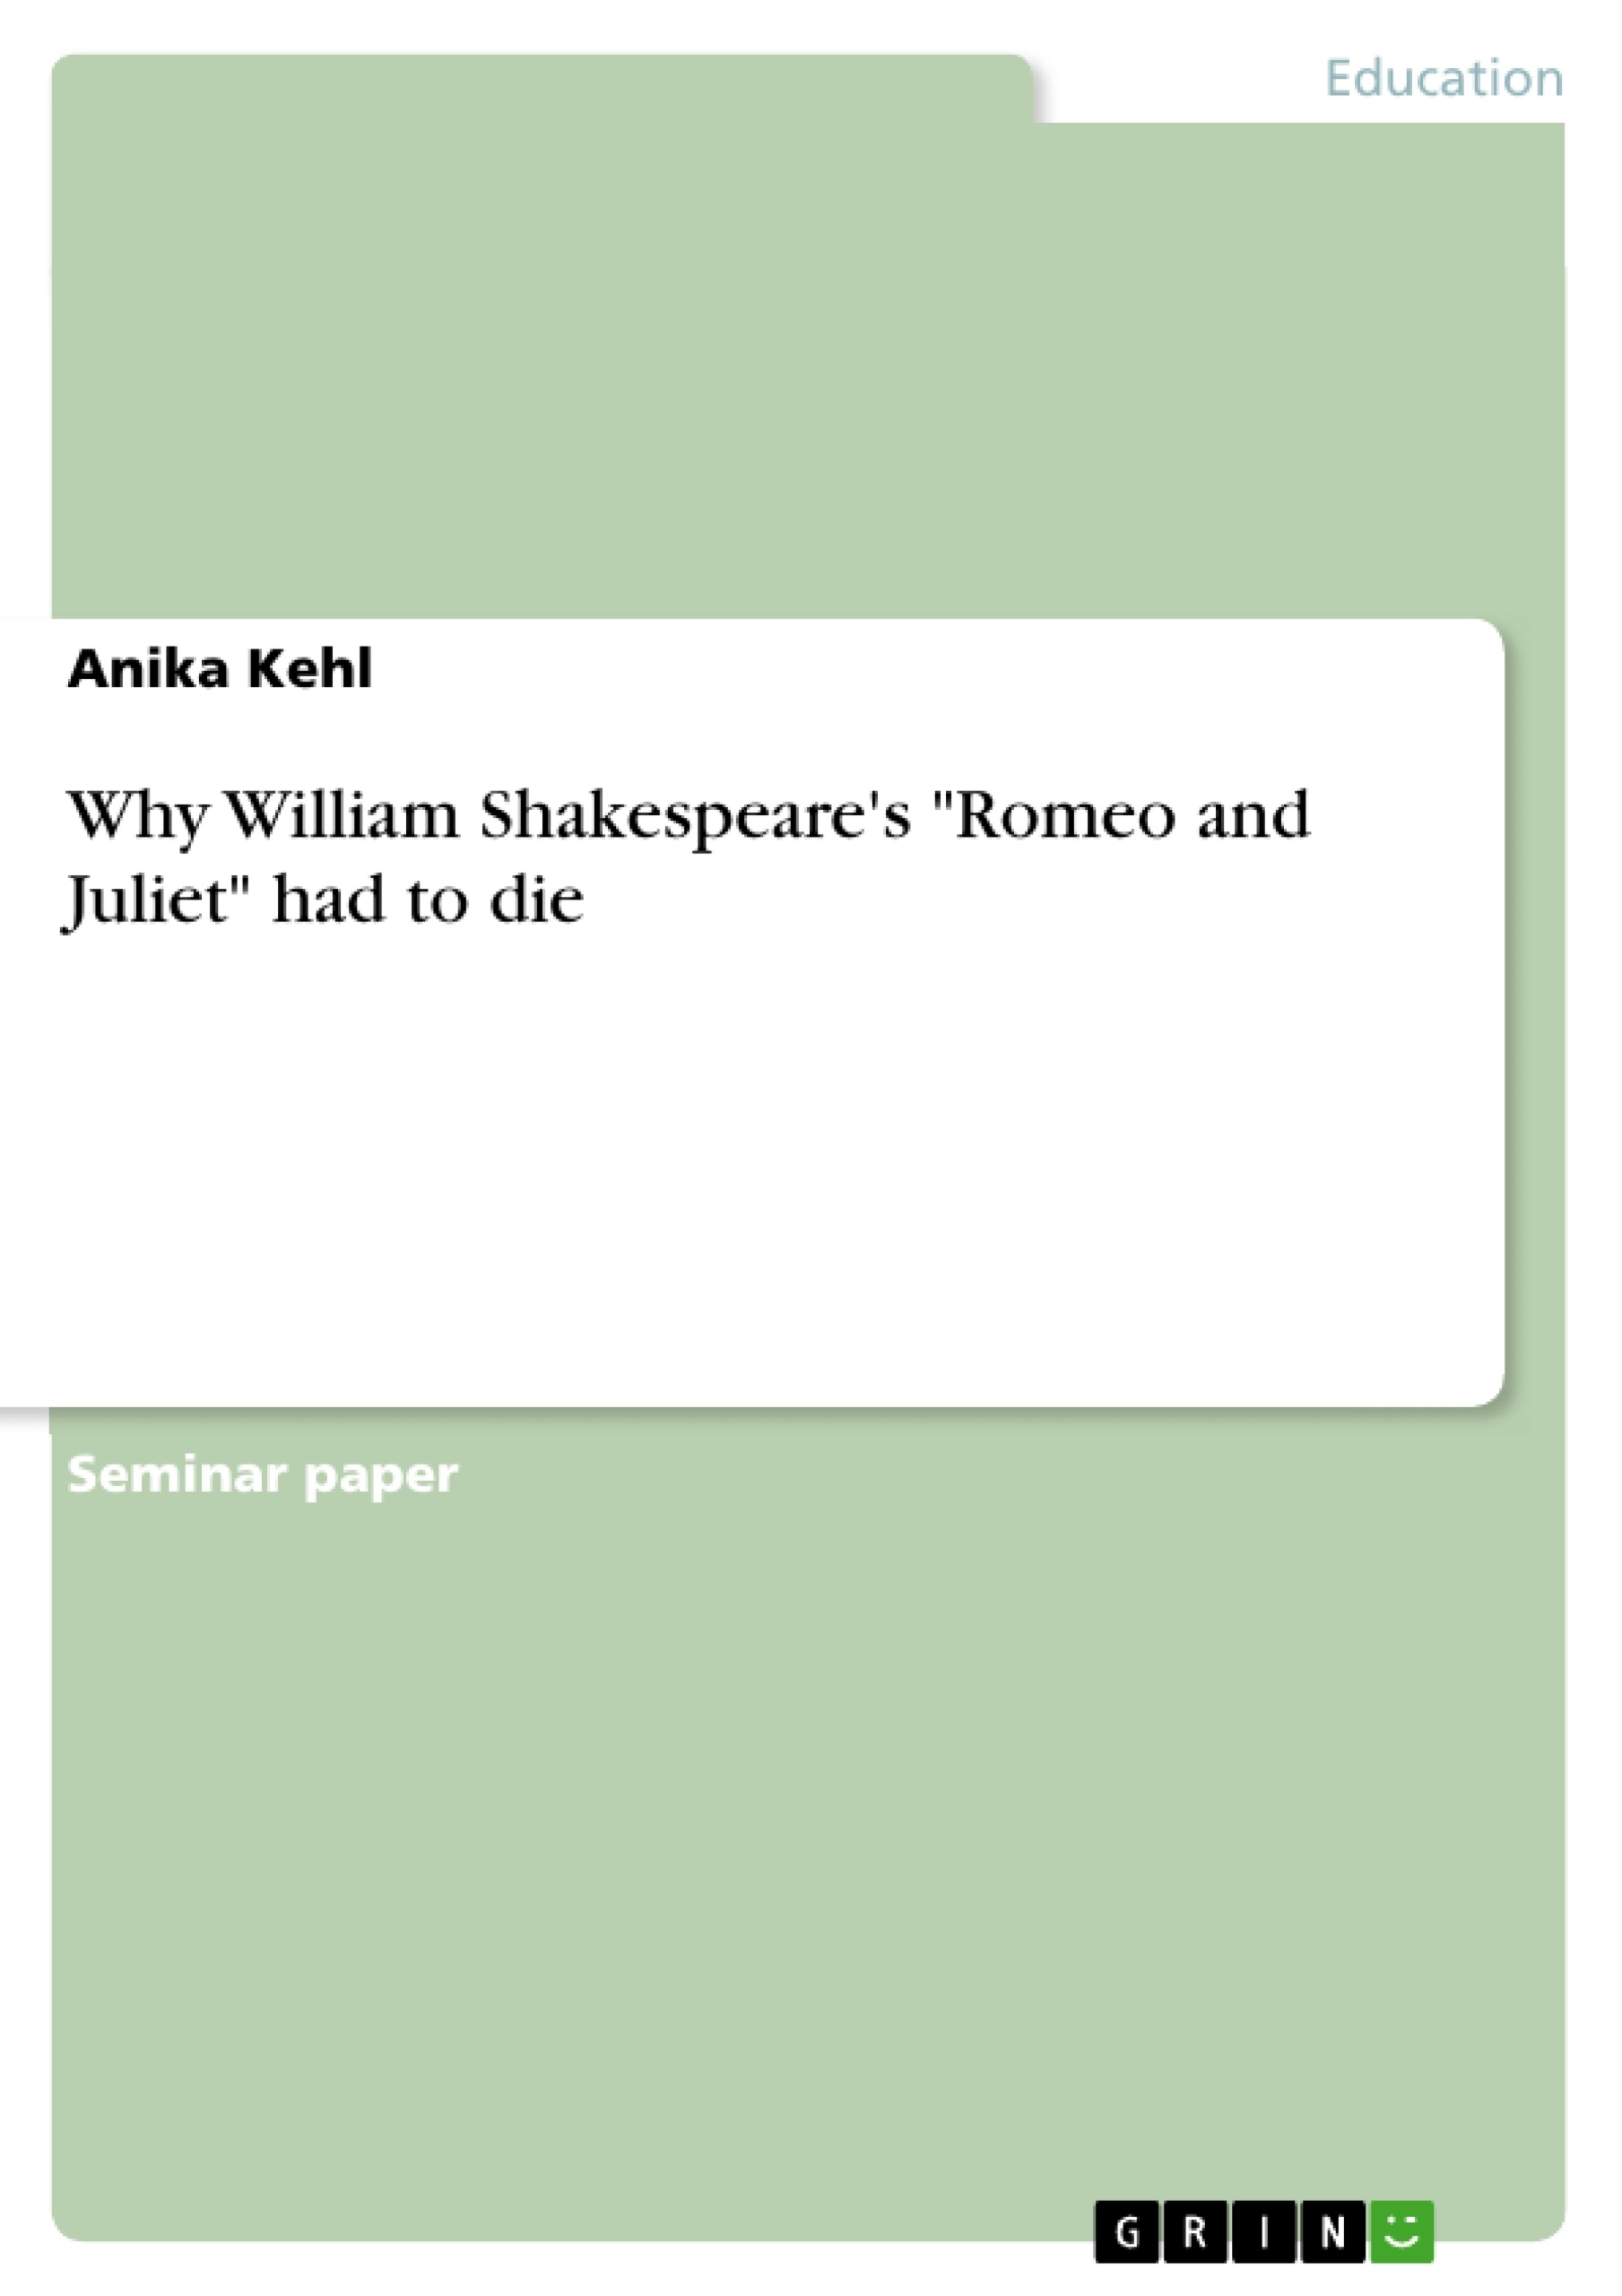 Titre: Why William Shakespeare's "Romeo and Juliet" had to die